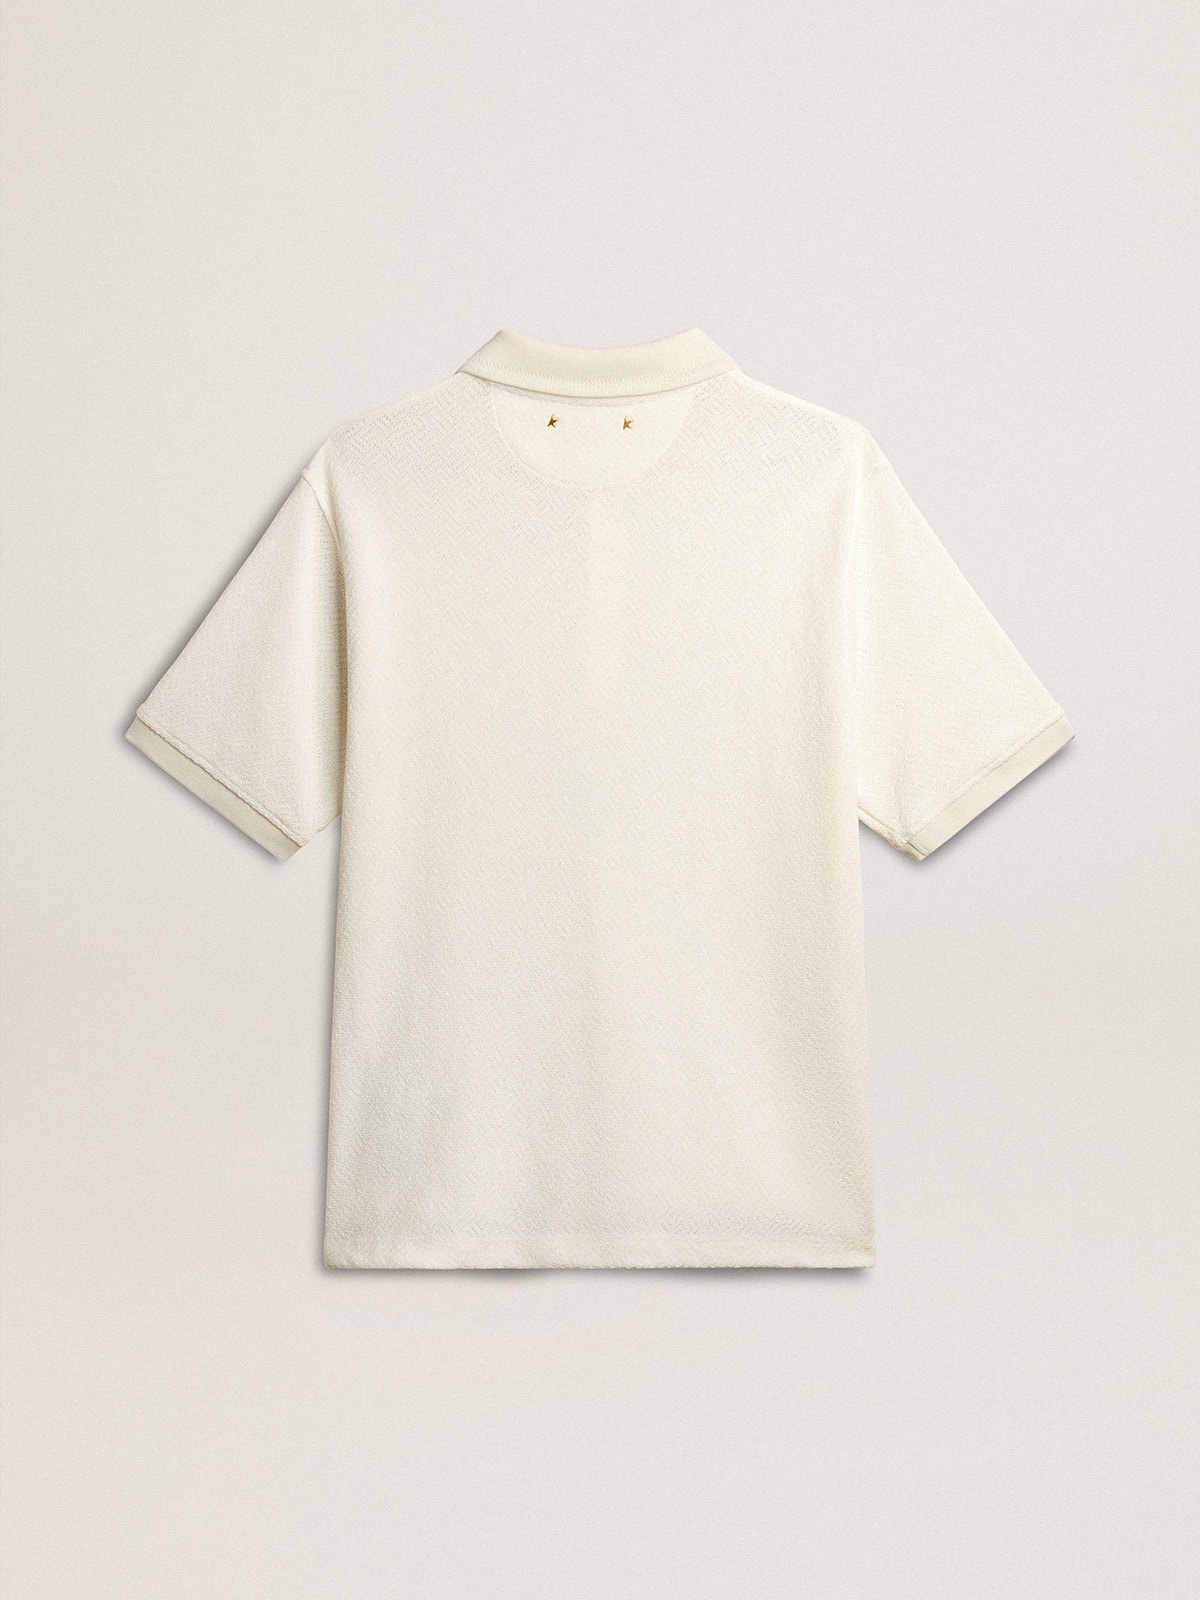 Men's polo shirt in white cotton with mother-of-pearl buttons - 6